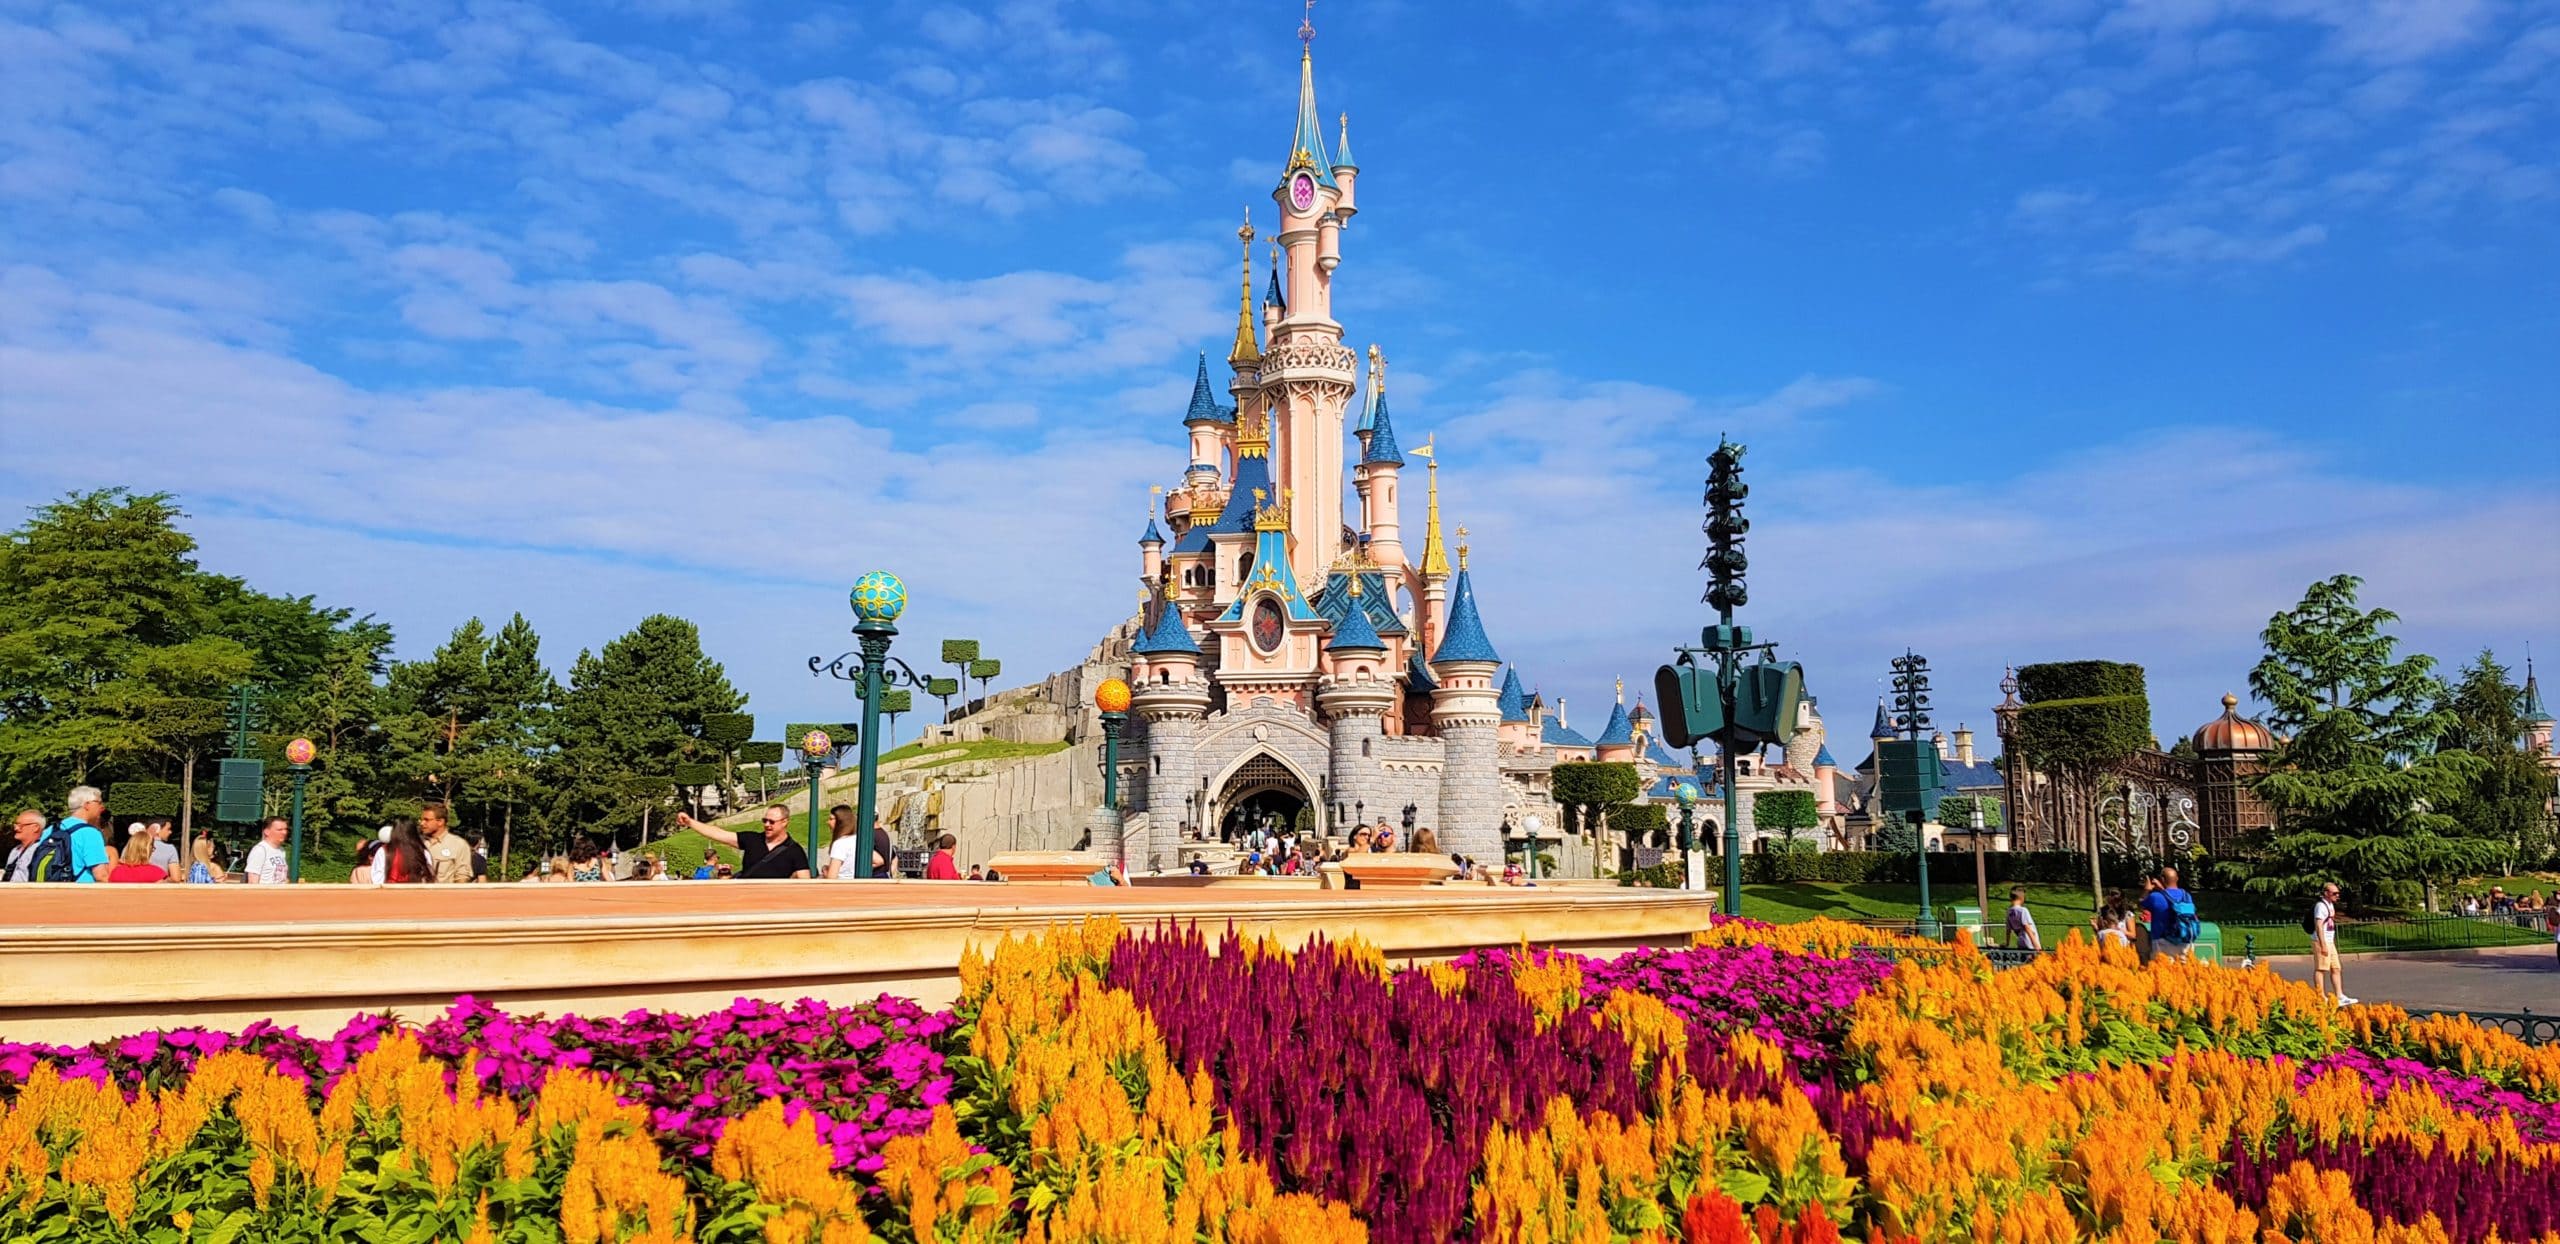 Disneyland Paris in one day? 2 parks in 1 day? Impossible?